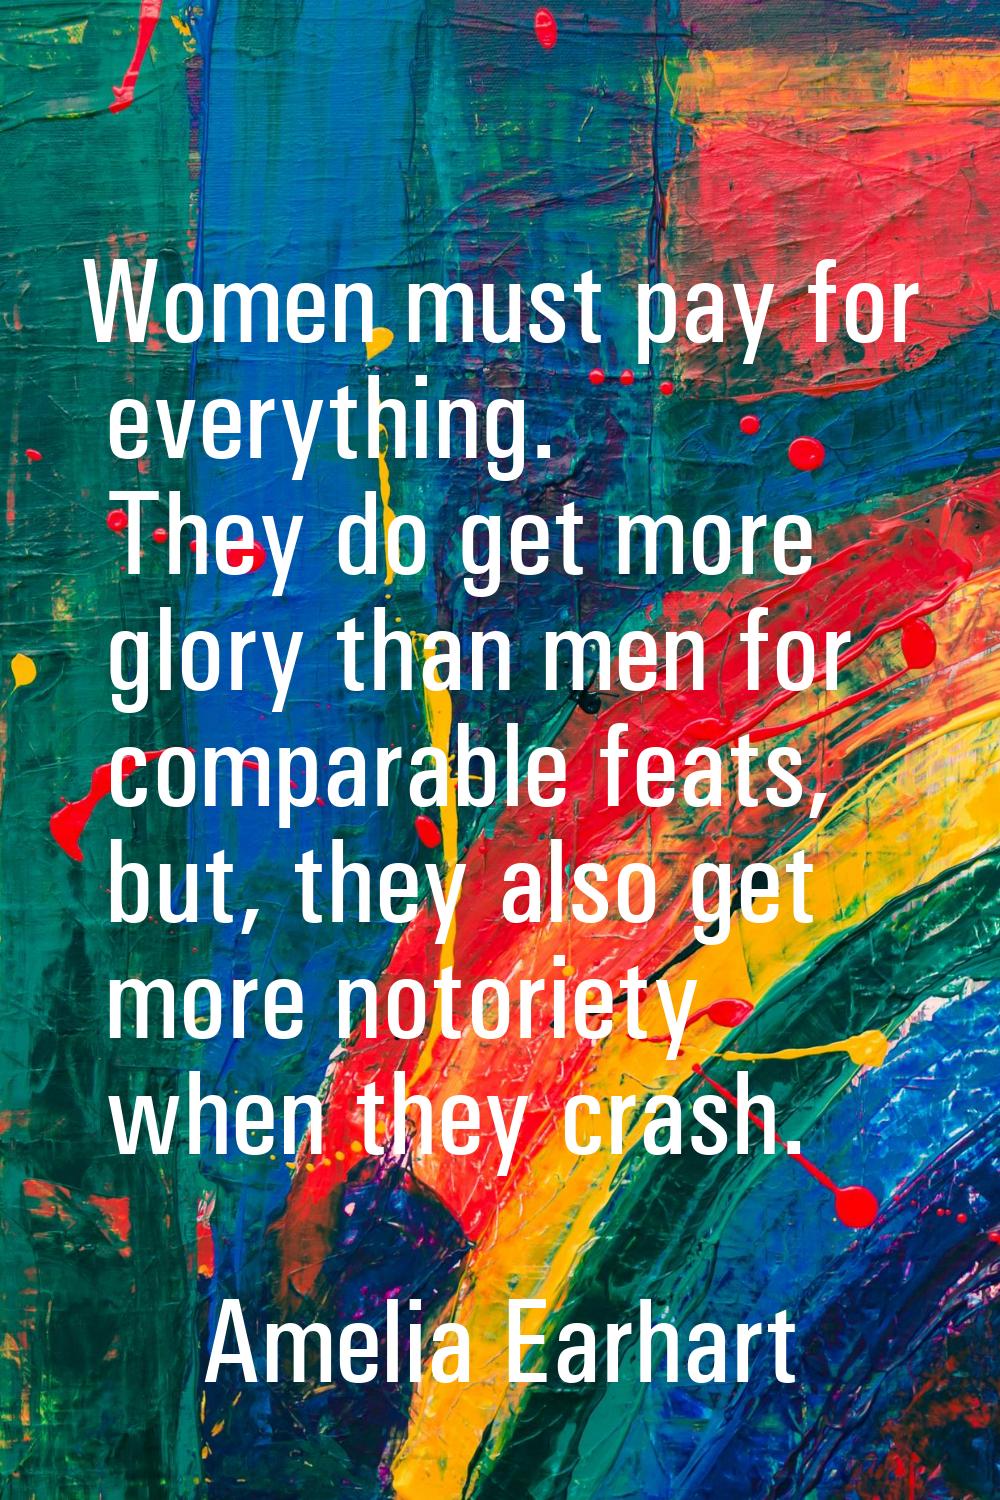 Women must pay for everything. They do get more glory than men for comparable feats, but, they also